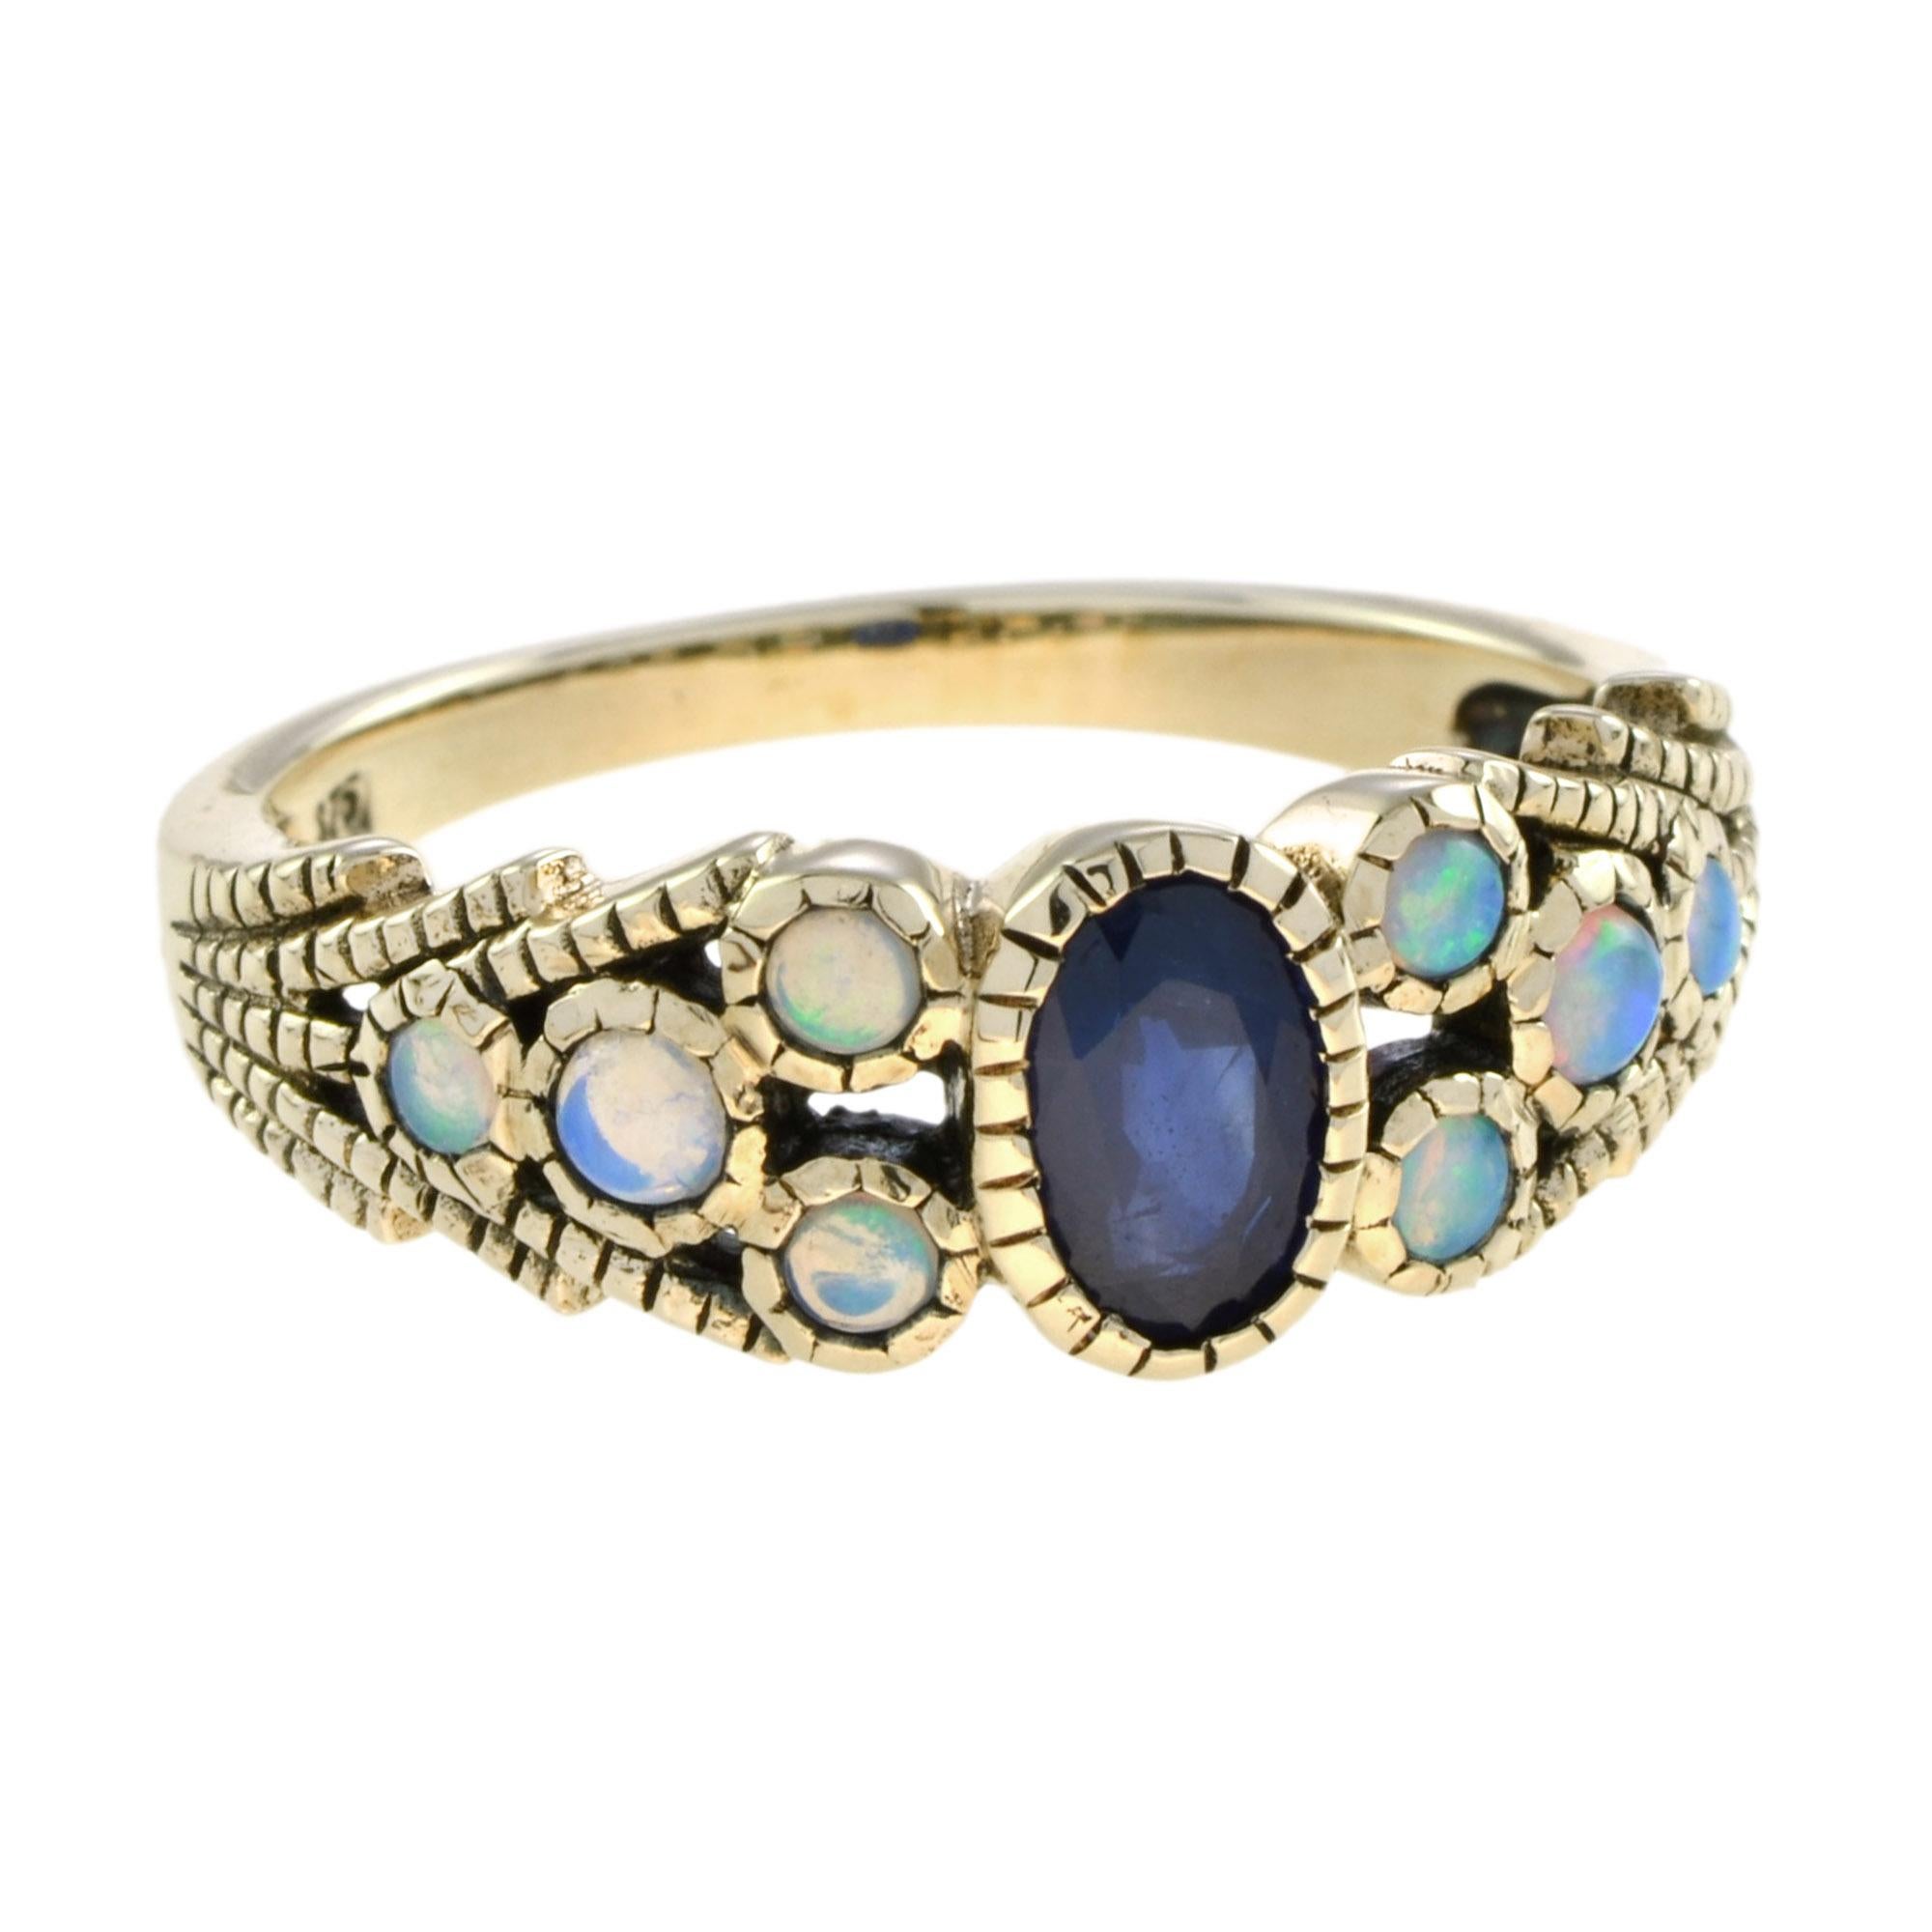 The delicate ring will make you feel like a chic woman with a thing for vintage design. With a center oval sapphire and opal accent, it is an envy piece for sure. 

Ring Information
Metal: 9K Yellow Gold 
Weight: 2.97 g. (approx. total weight)
Size: